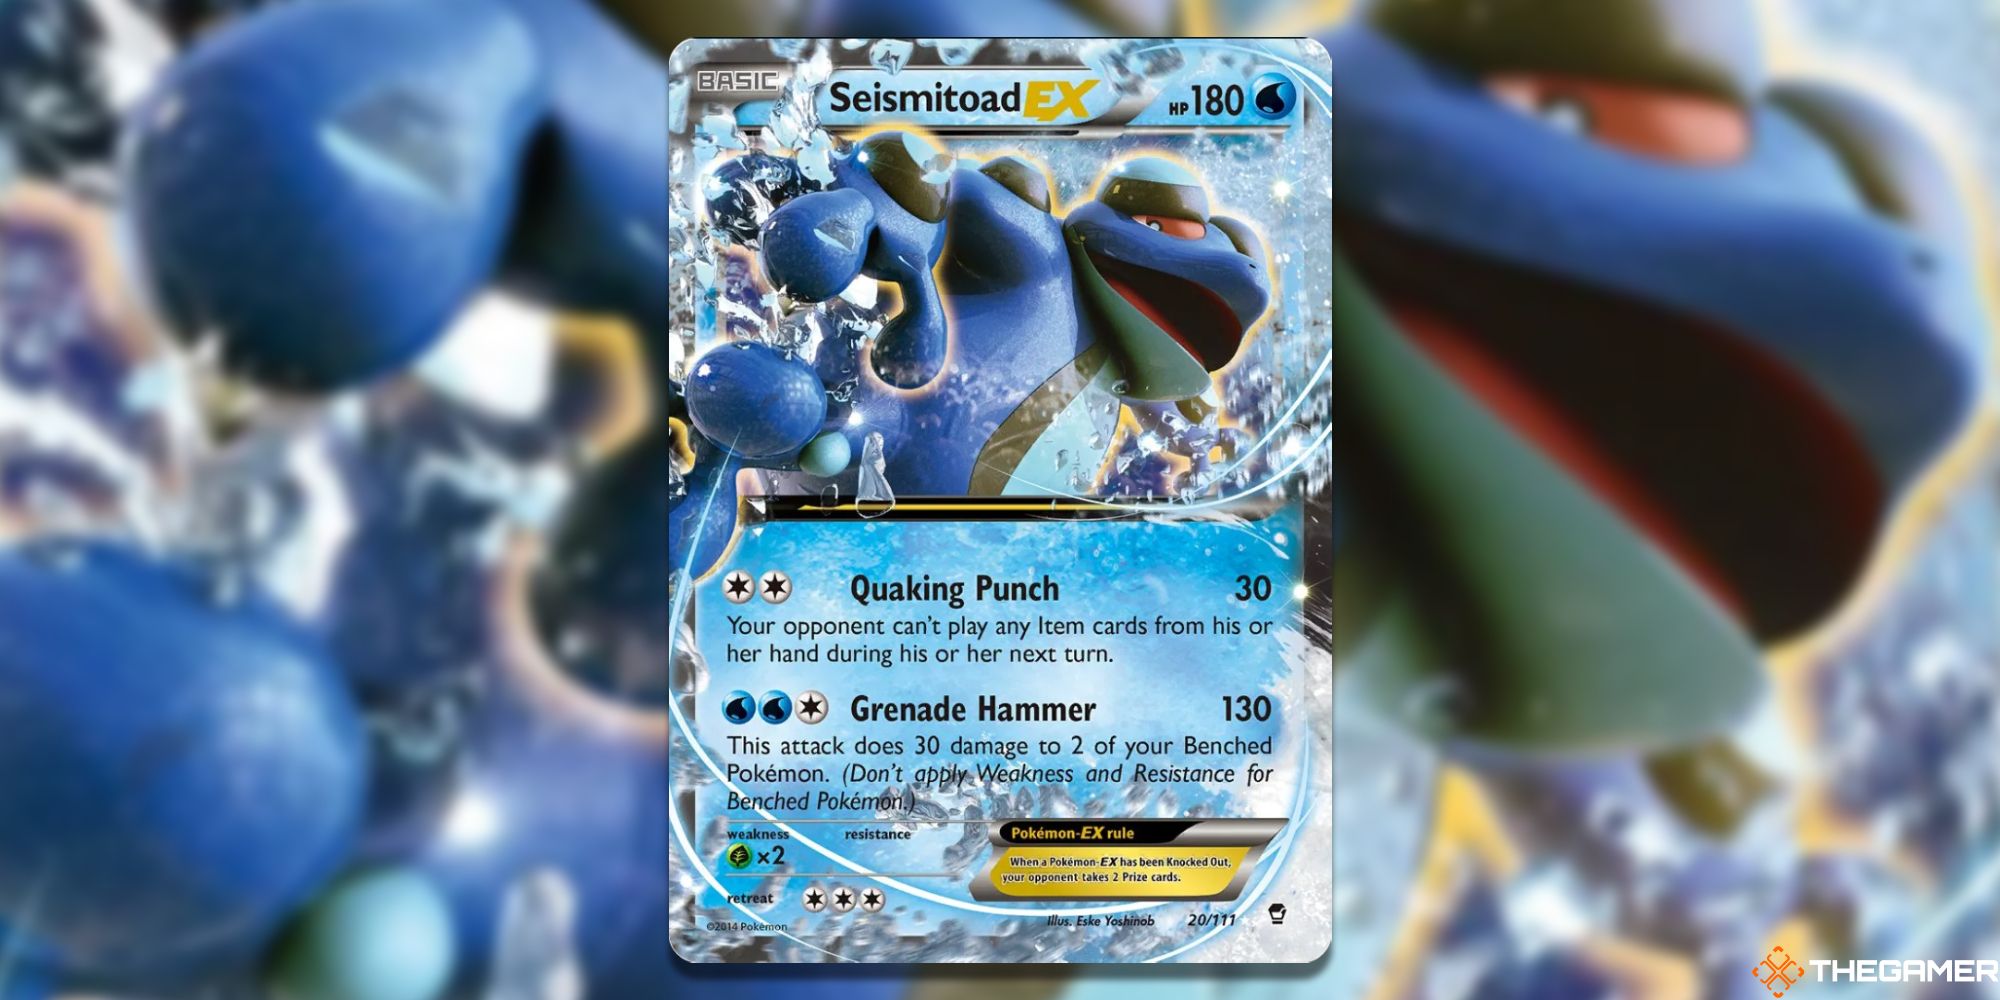 Seismitoad-EX from Furious Fists Card Art with blurred background